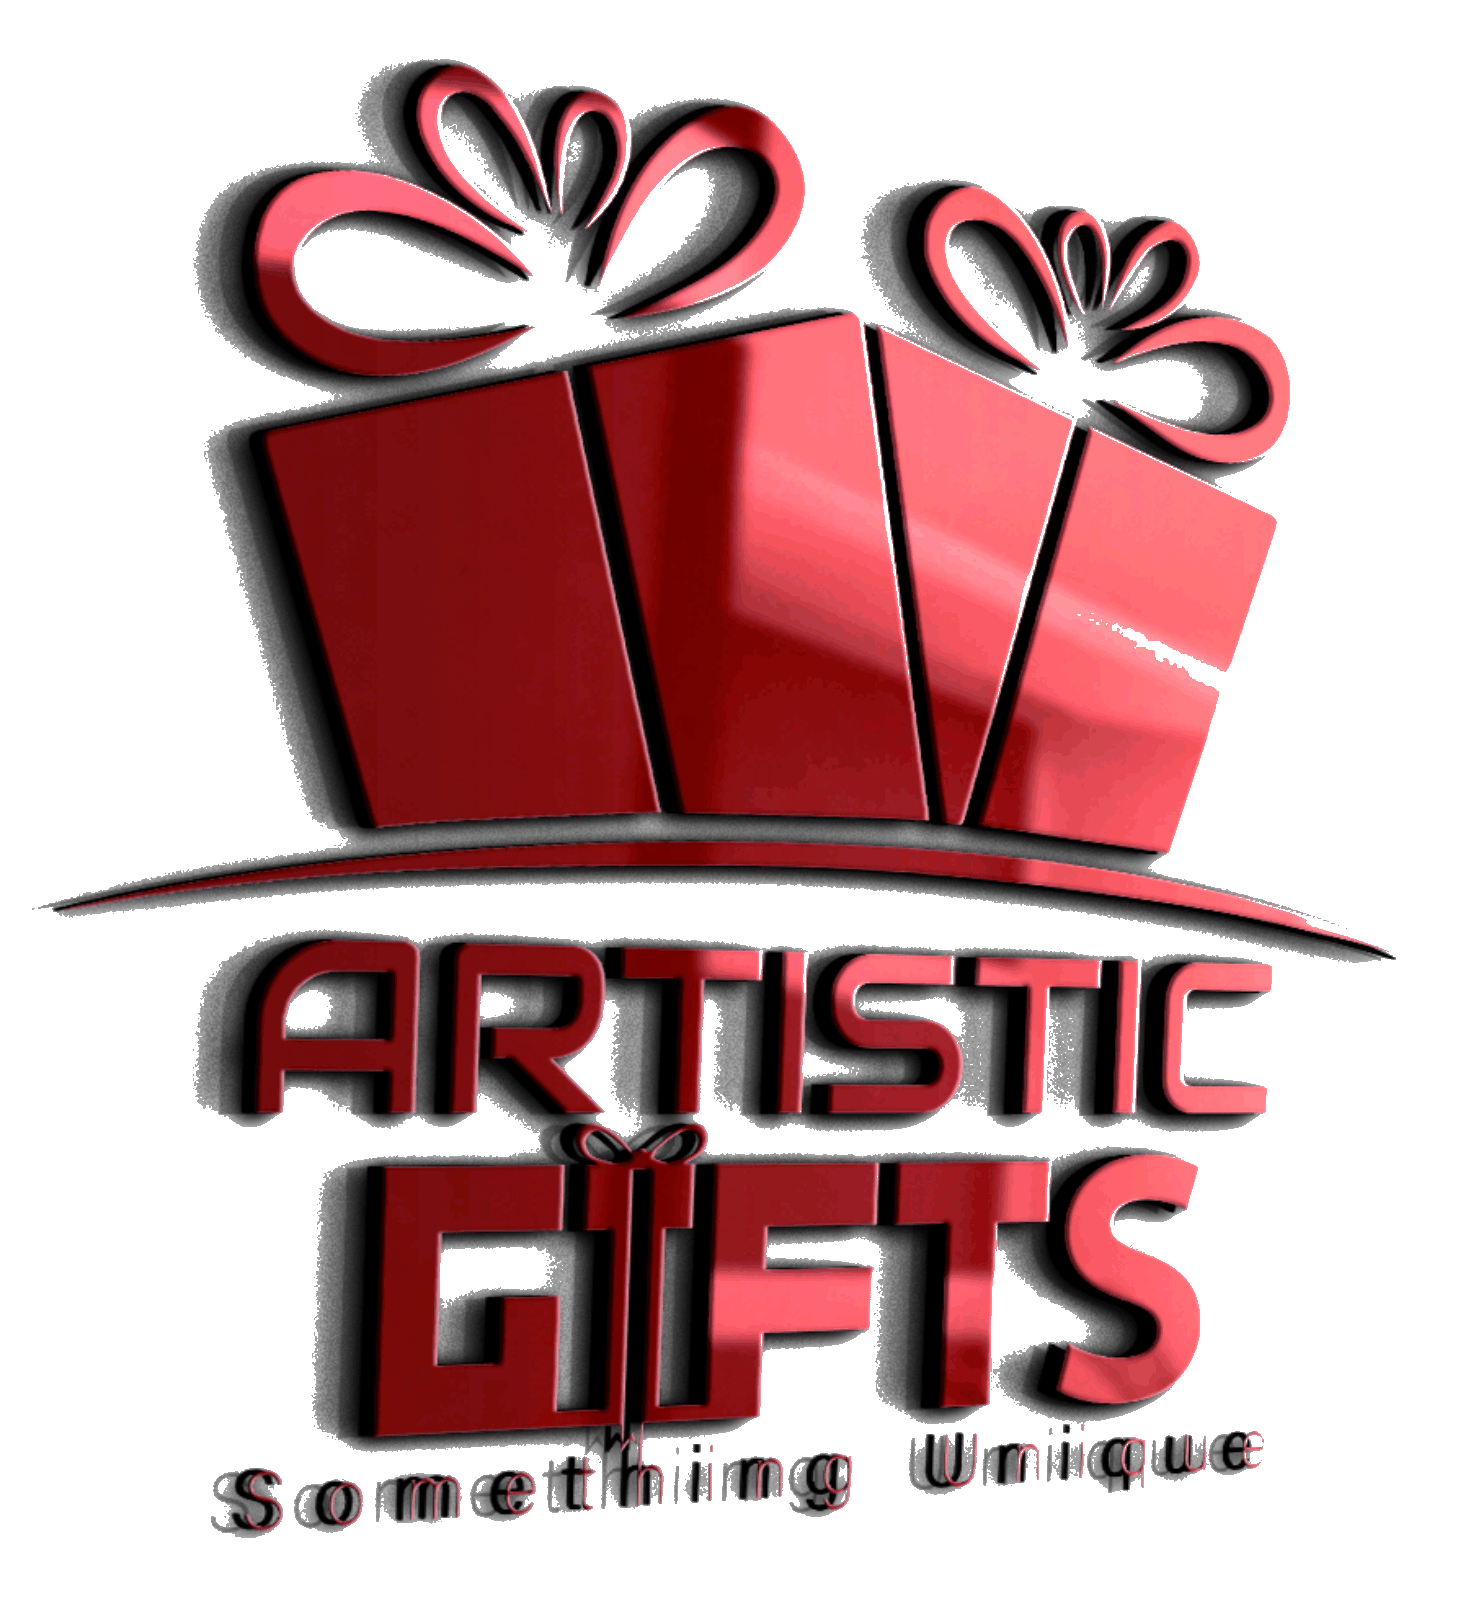 Customized Gifts– Artistic Gifts